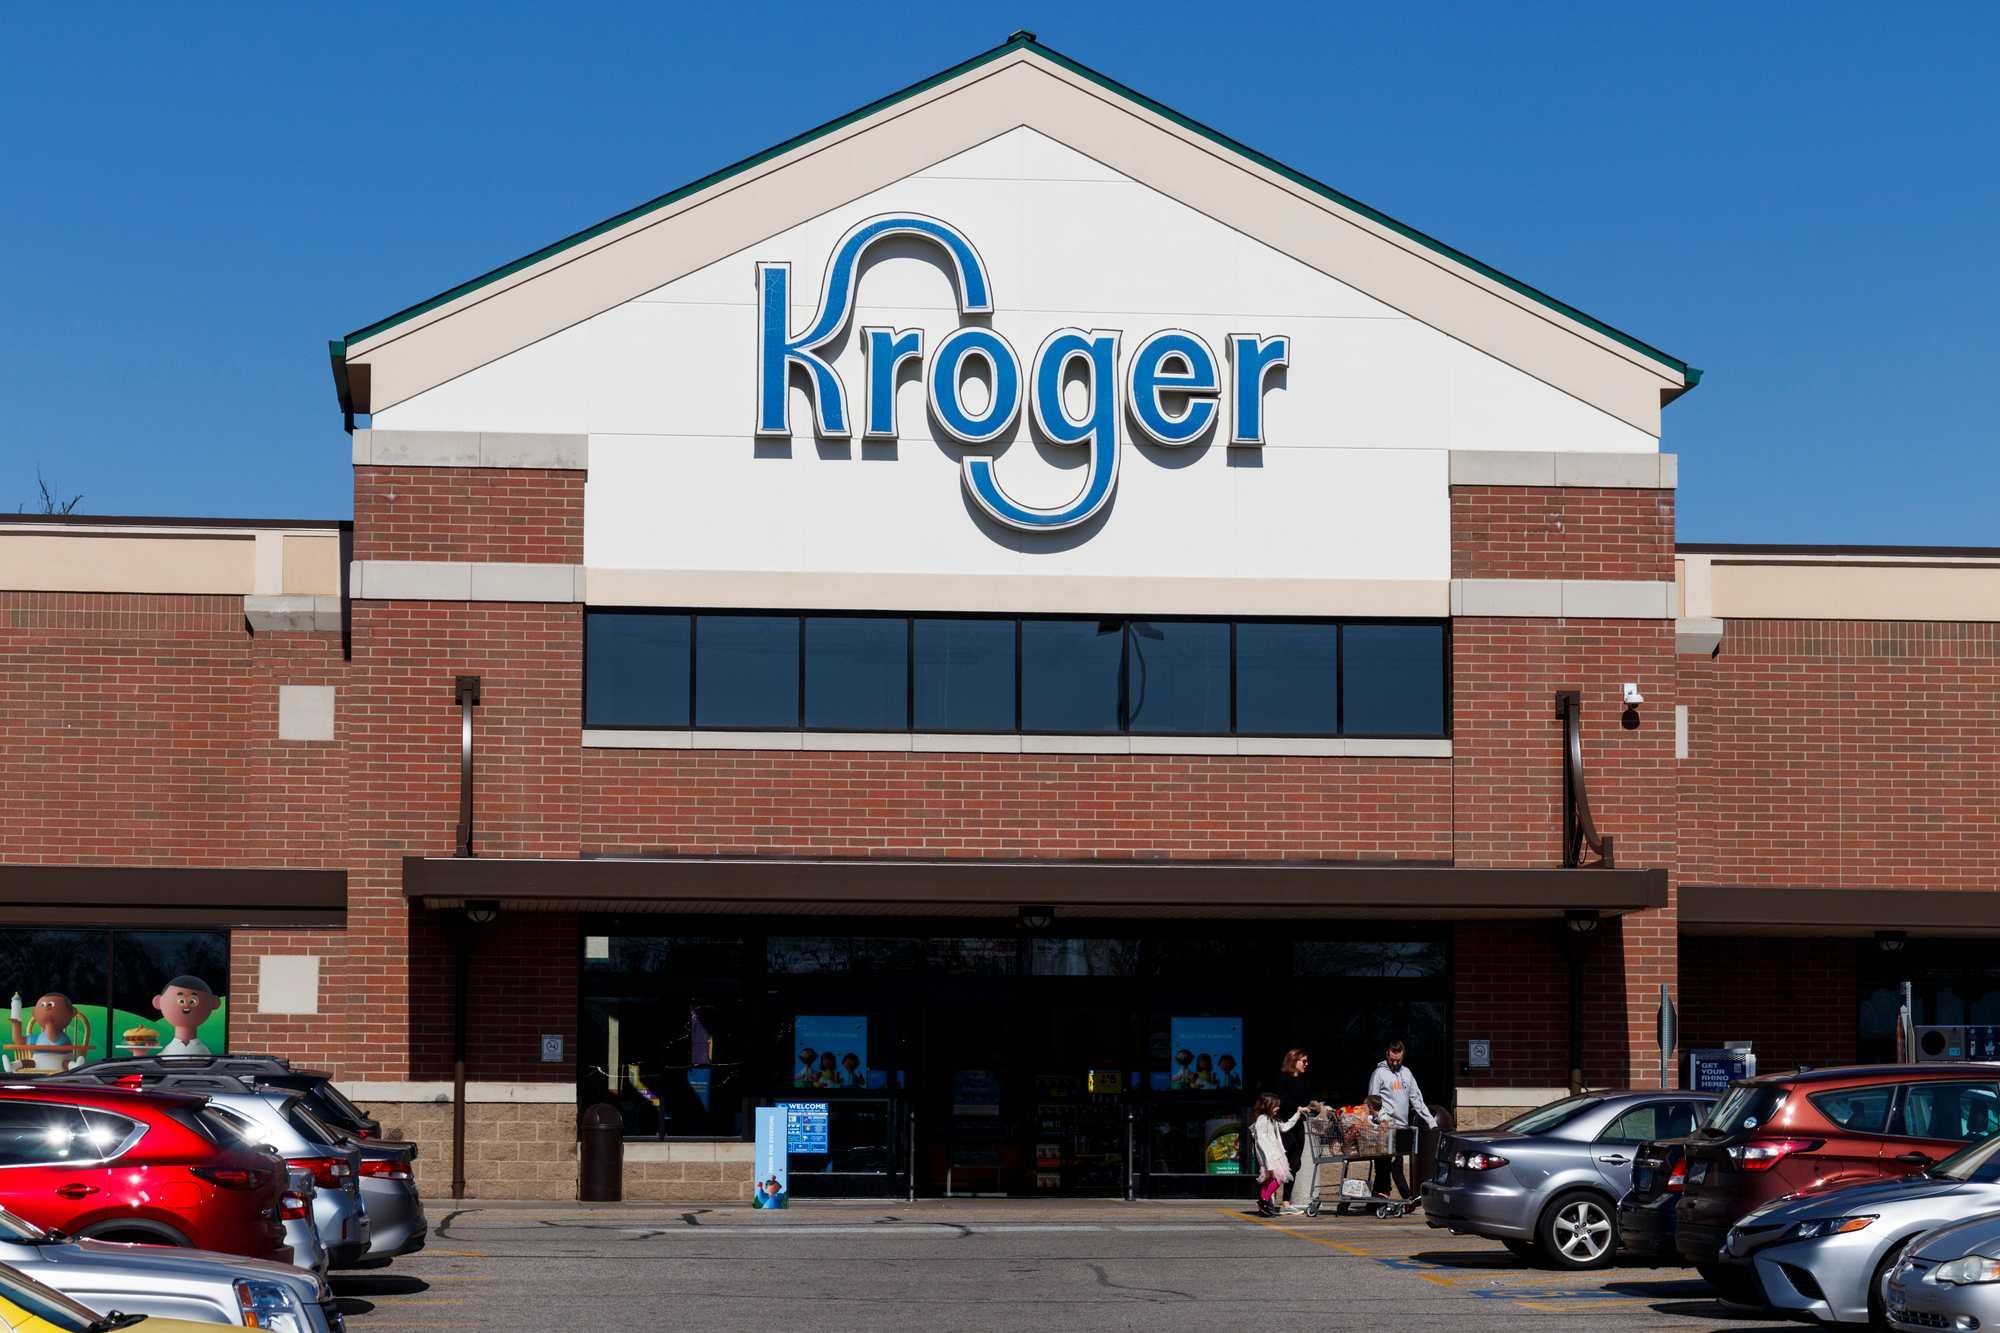 Kroger Employees Face Massive Data Breach, Chance of Identity Theft, Class Action Claims